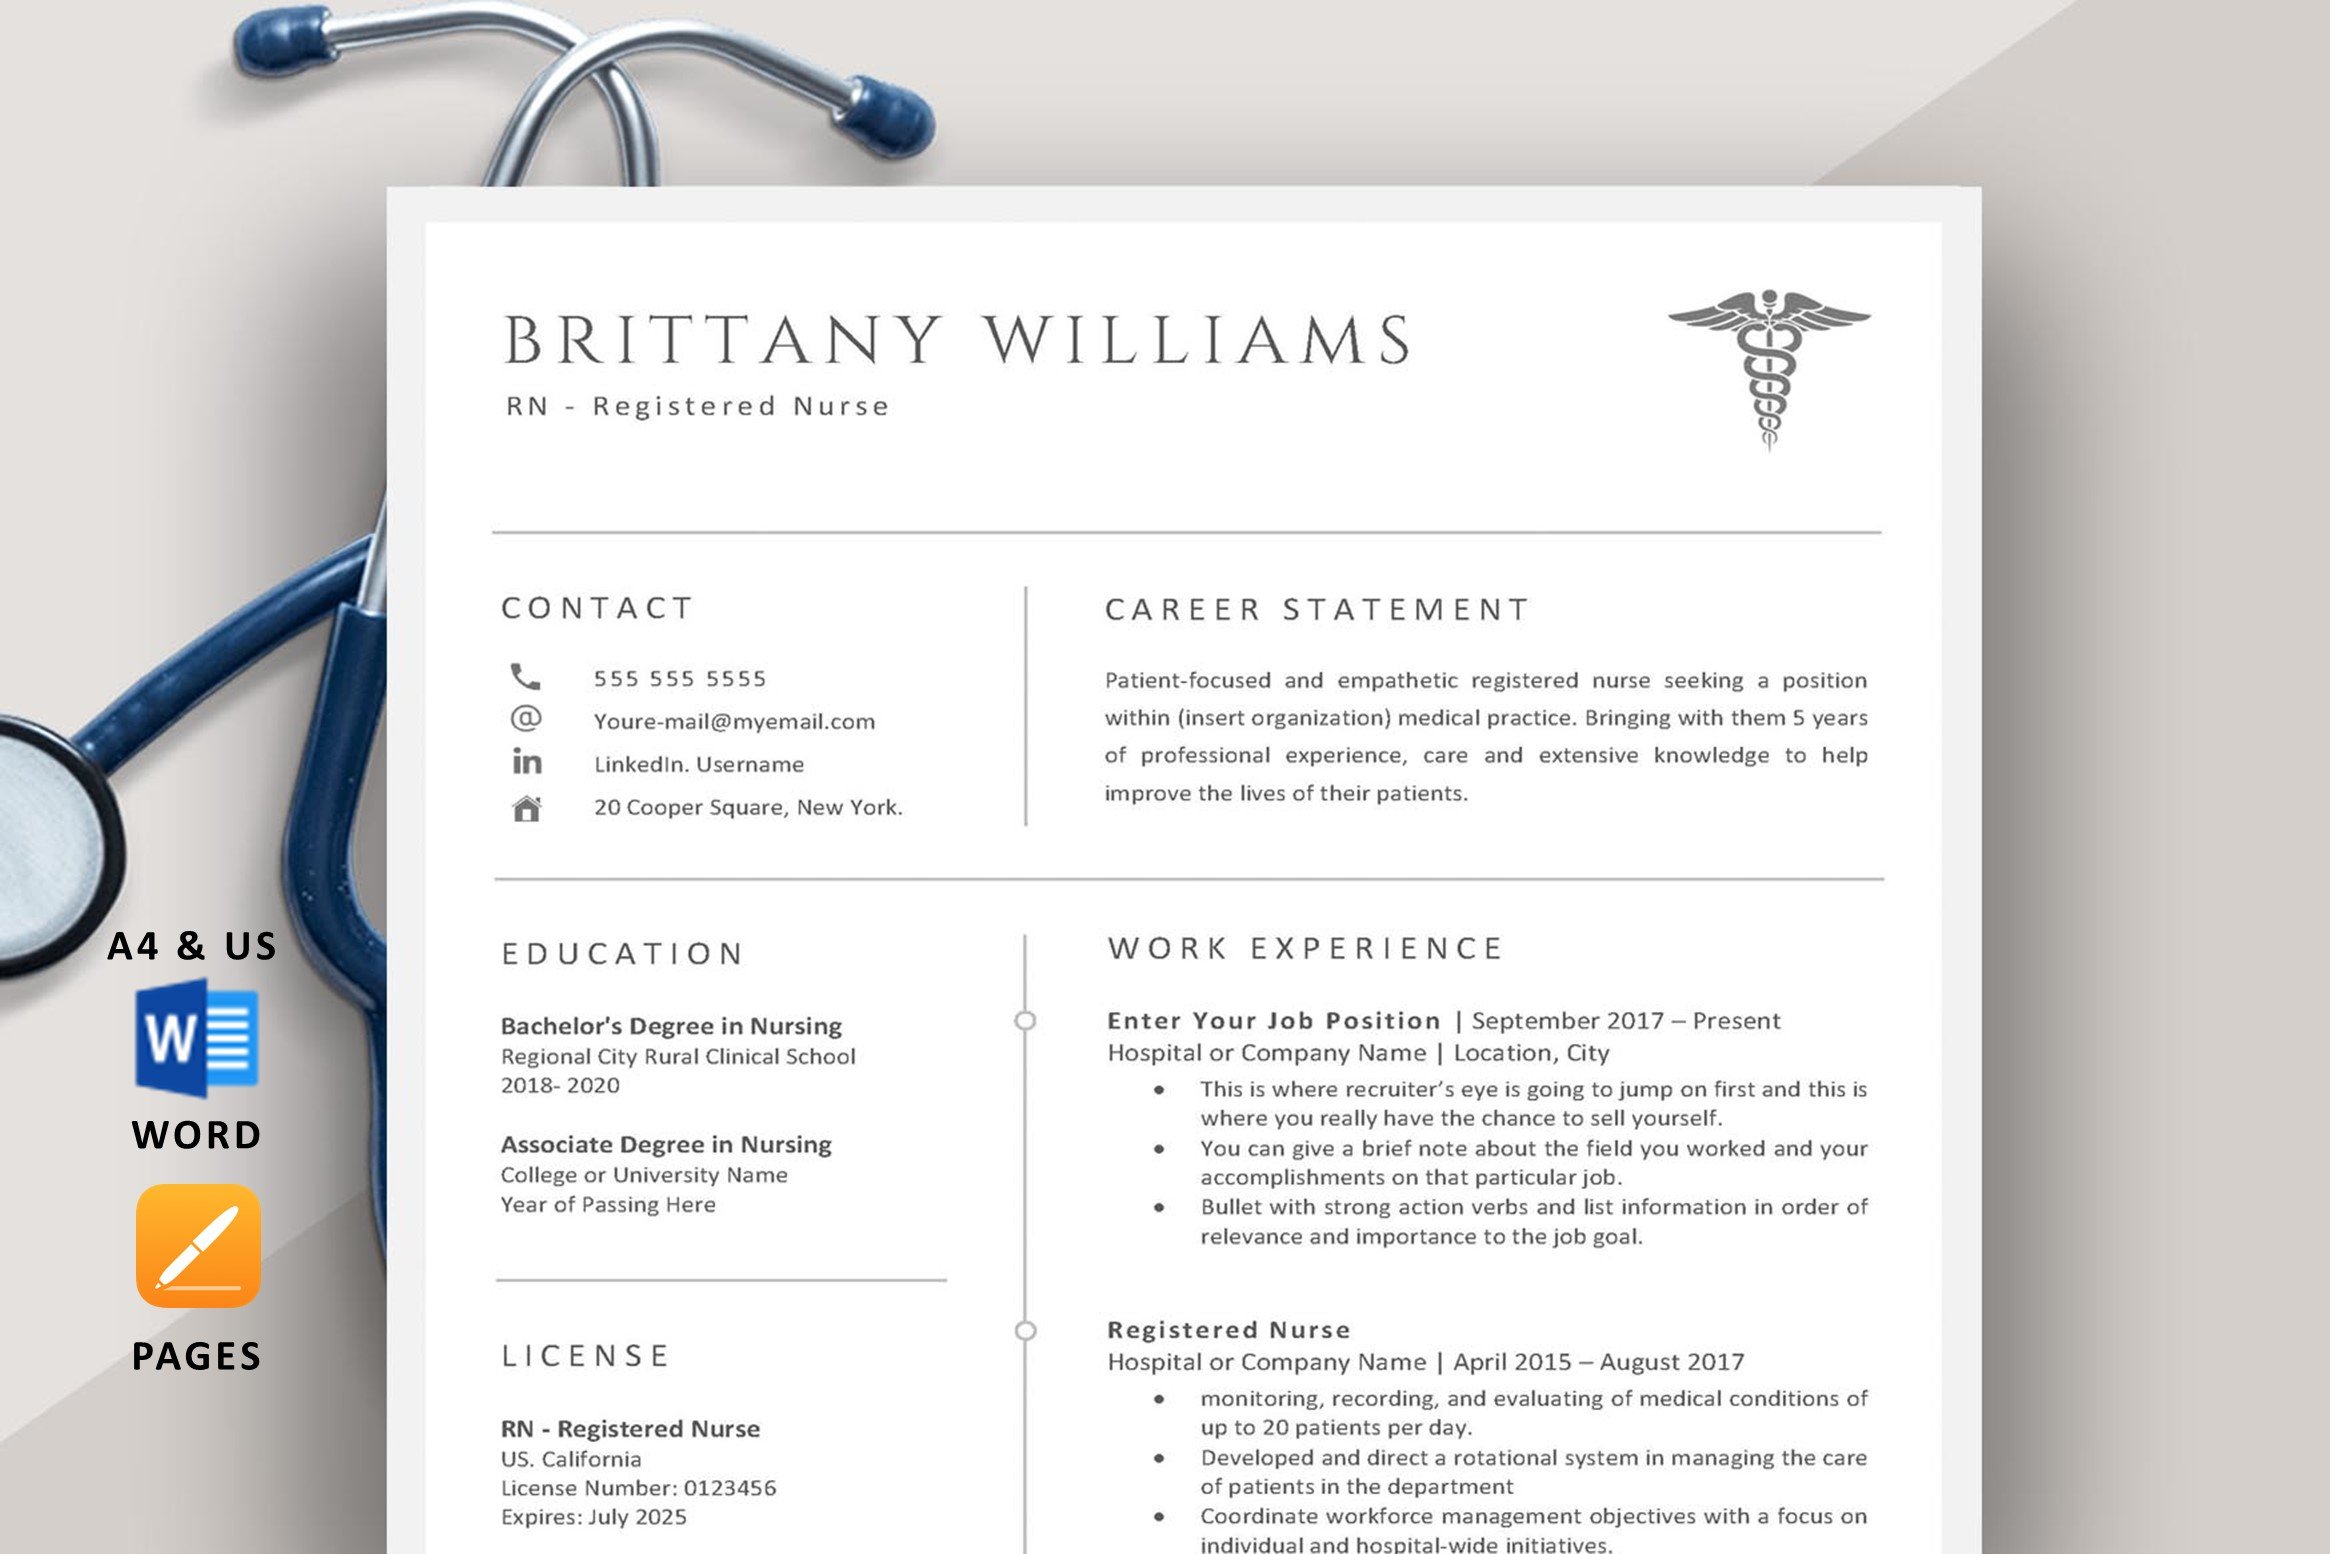 Nurse practitioner resume template cover image.